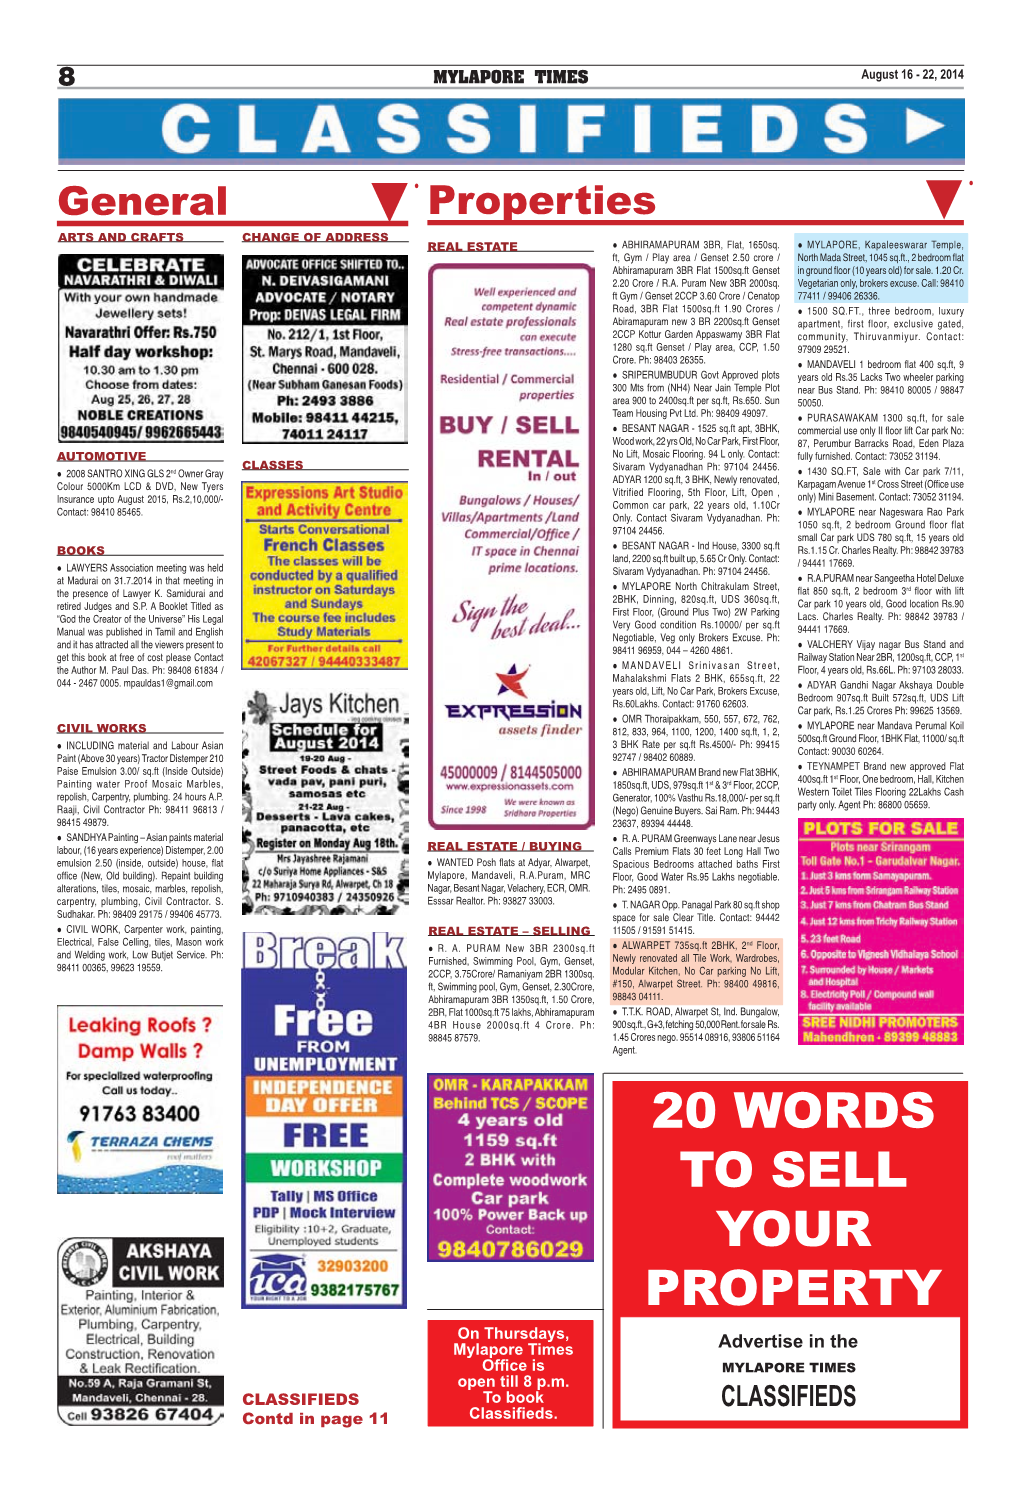 20 WORDS to SELL YOUR PROPERTY on Thursdays, Mylapore Times Advertise in the Office Is MYLAPORE TIMES Open Till 8 P.M